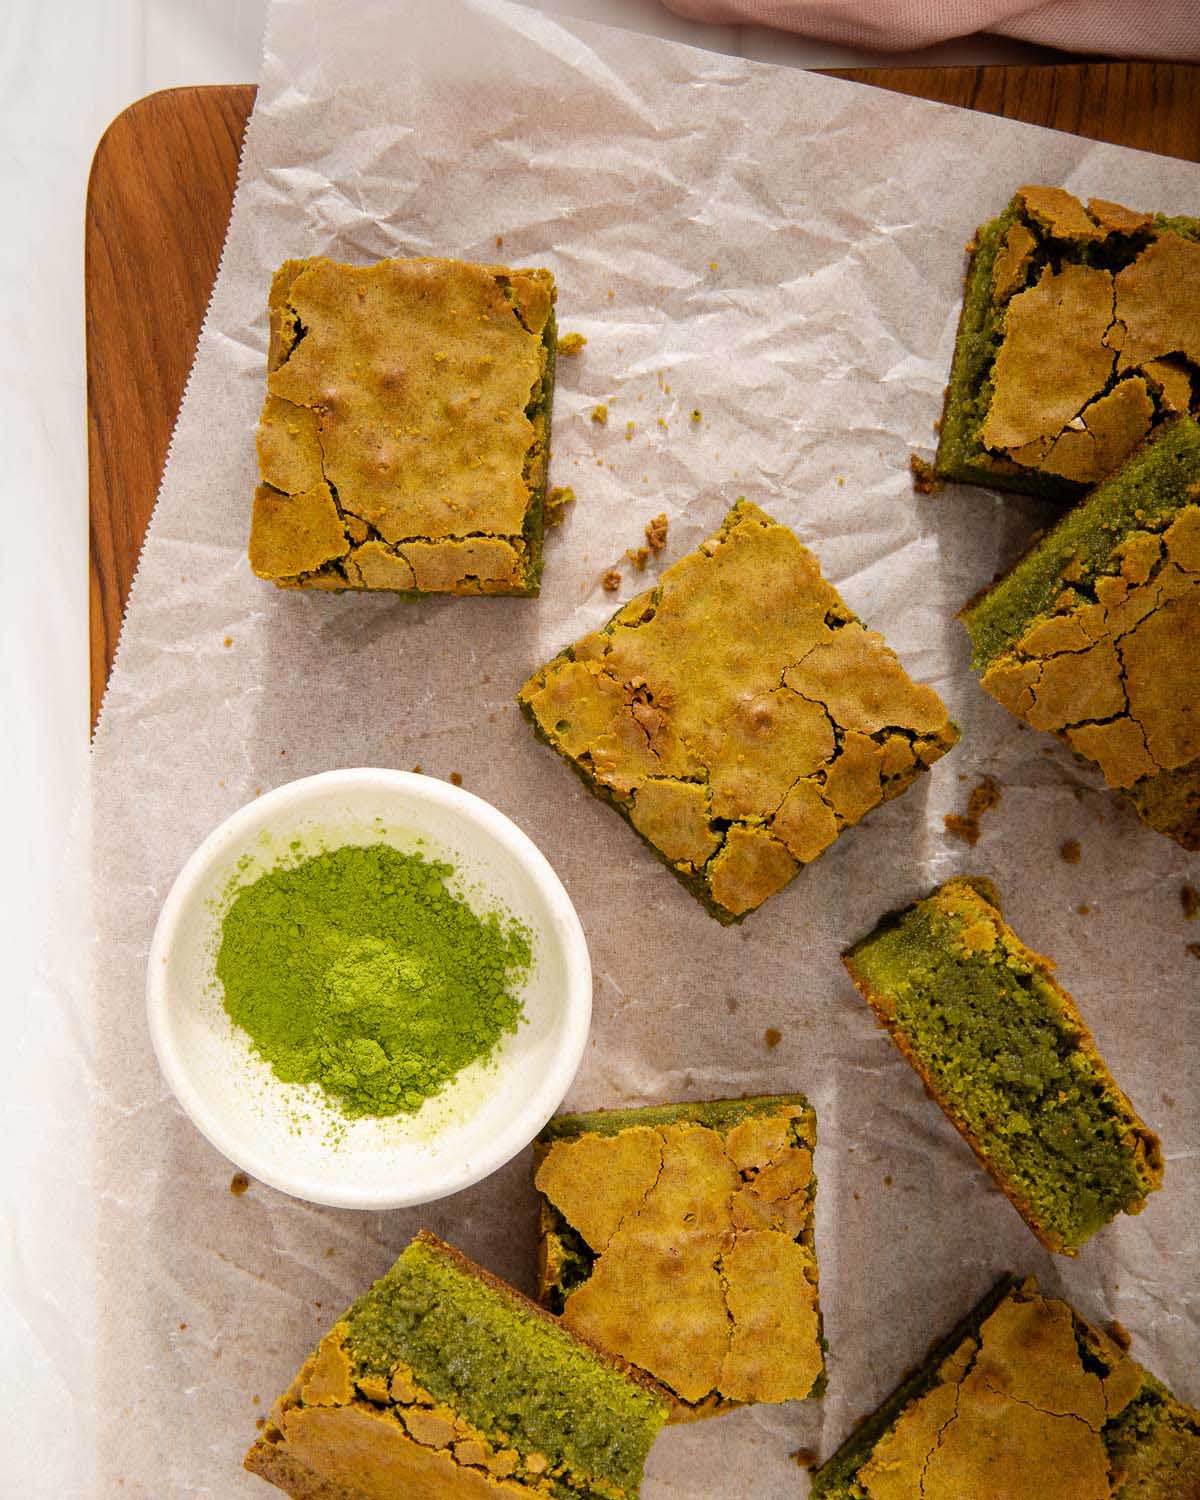 A tray of brownies with matcha powder nearby.